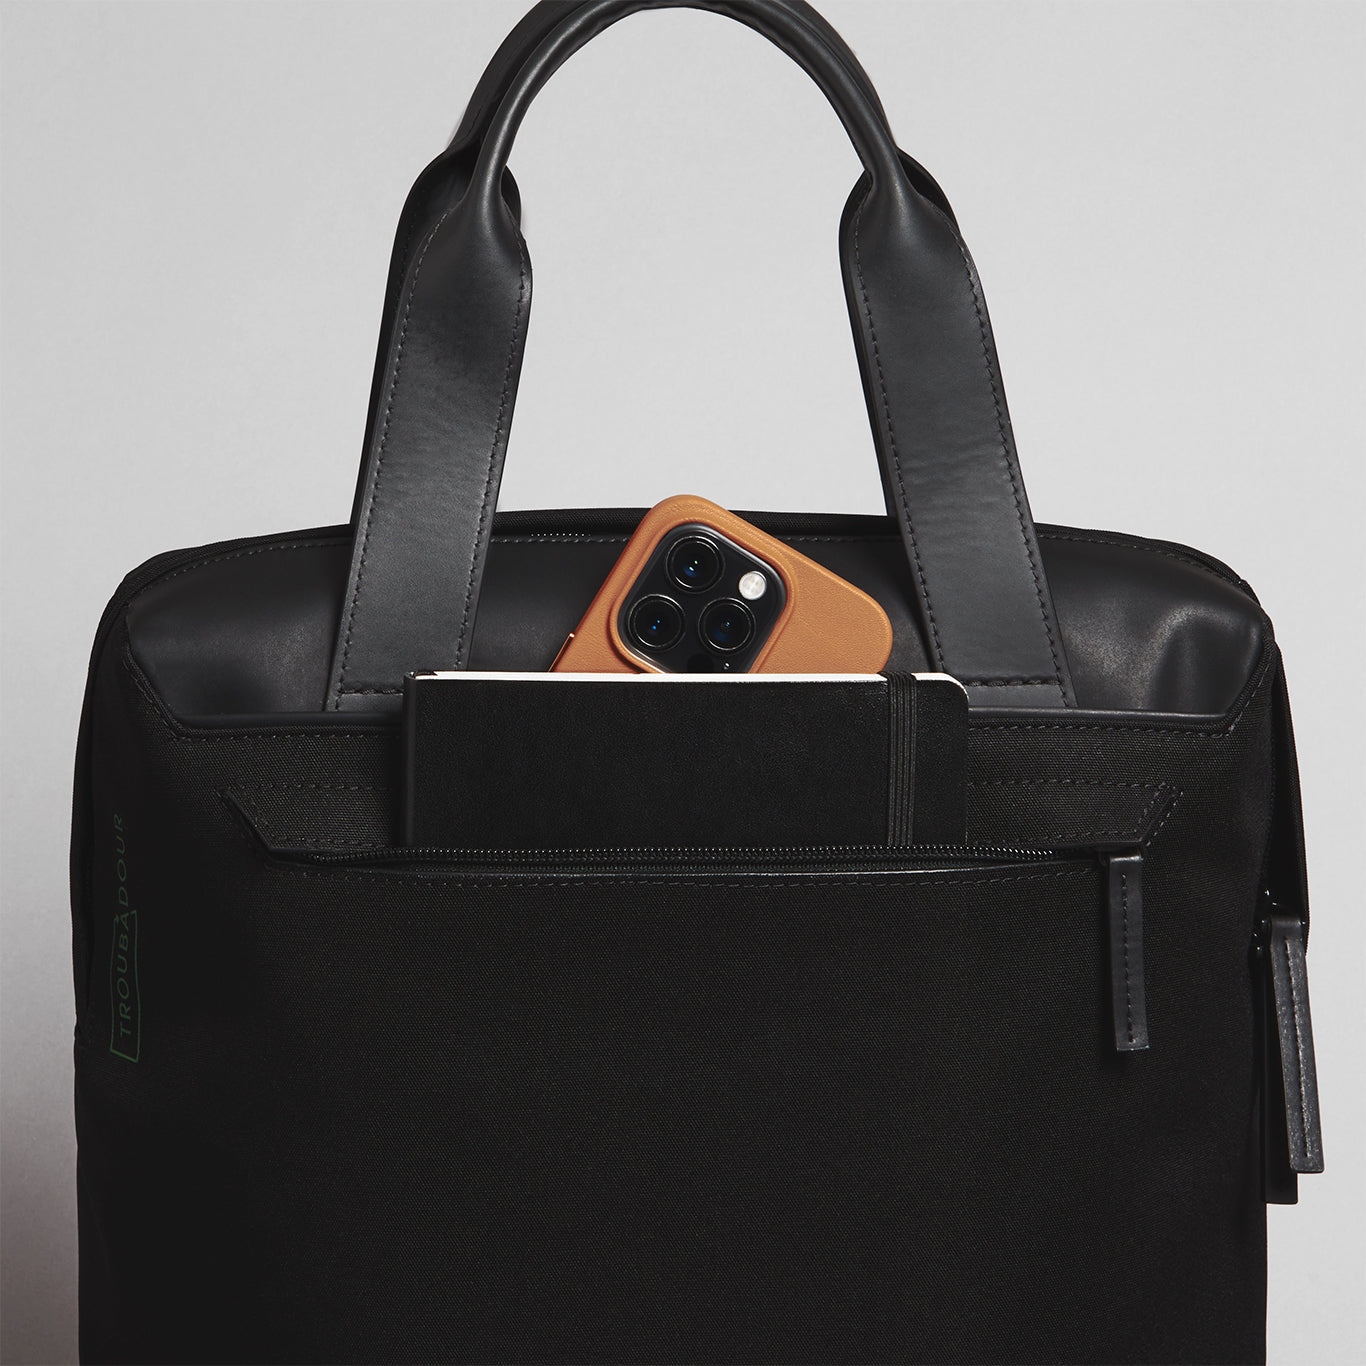 Classic leather bags from London. #bags